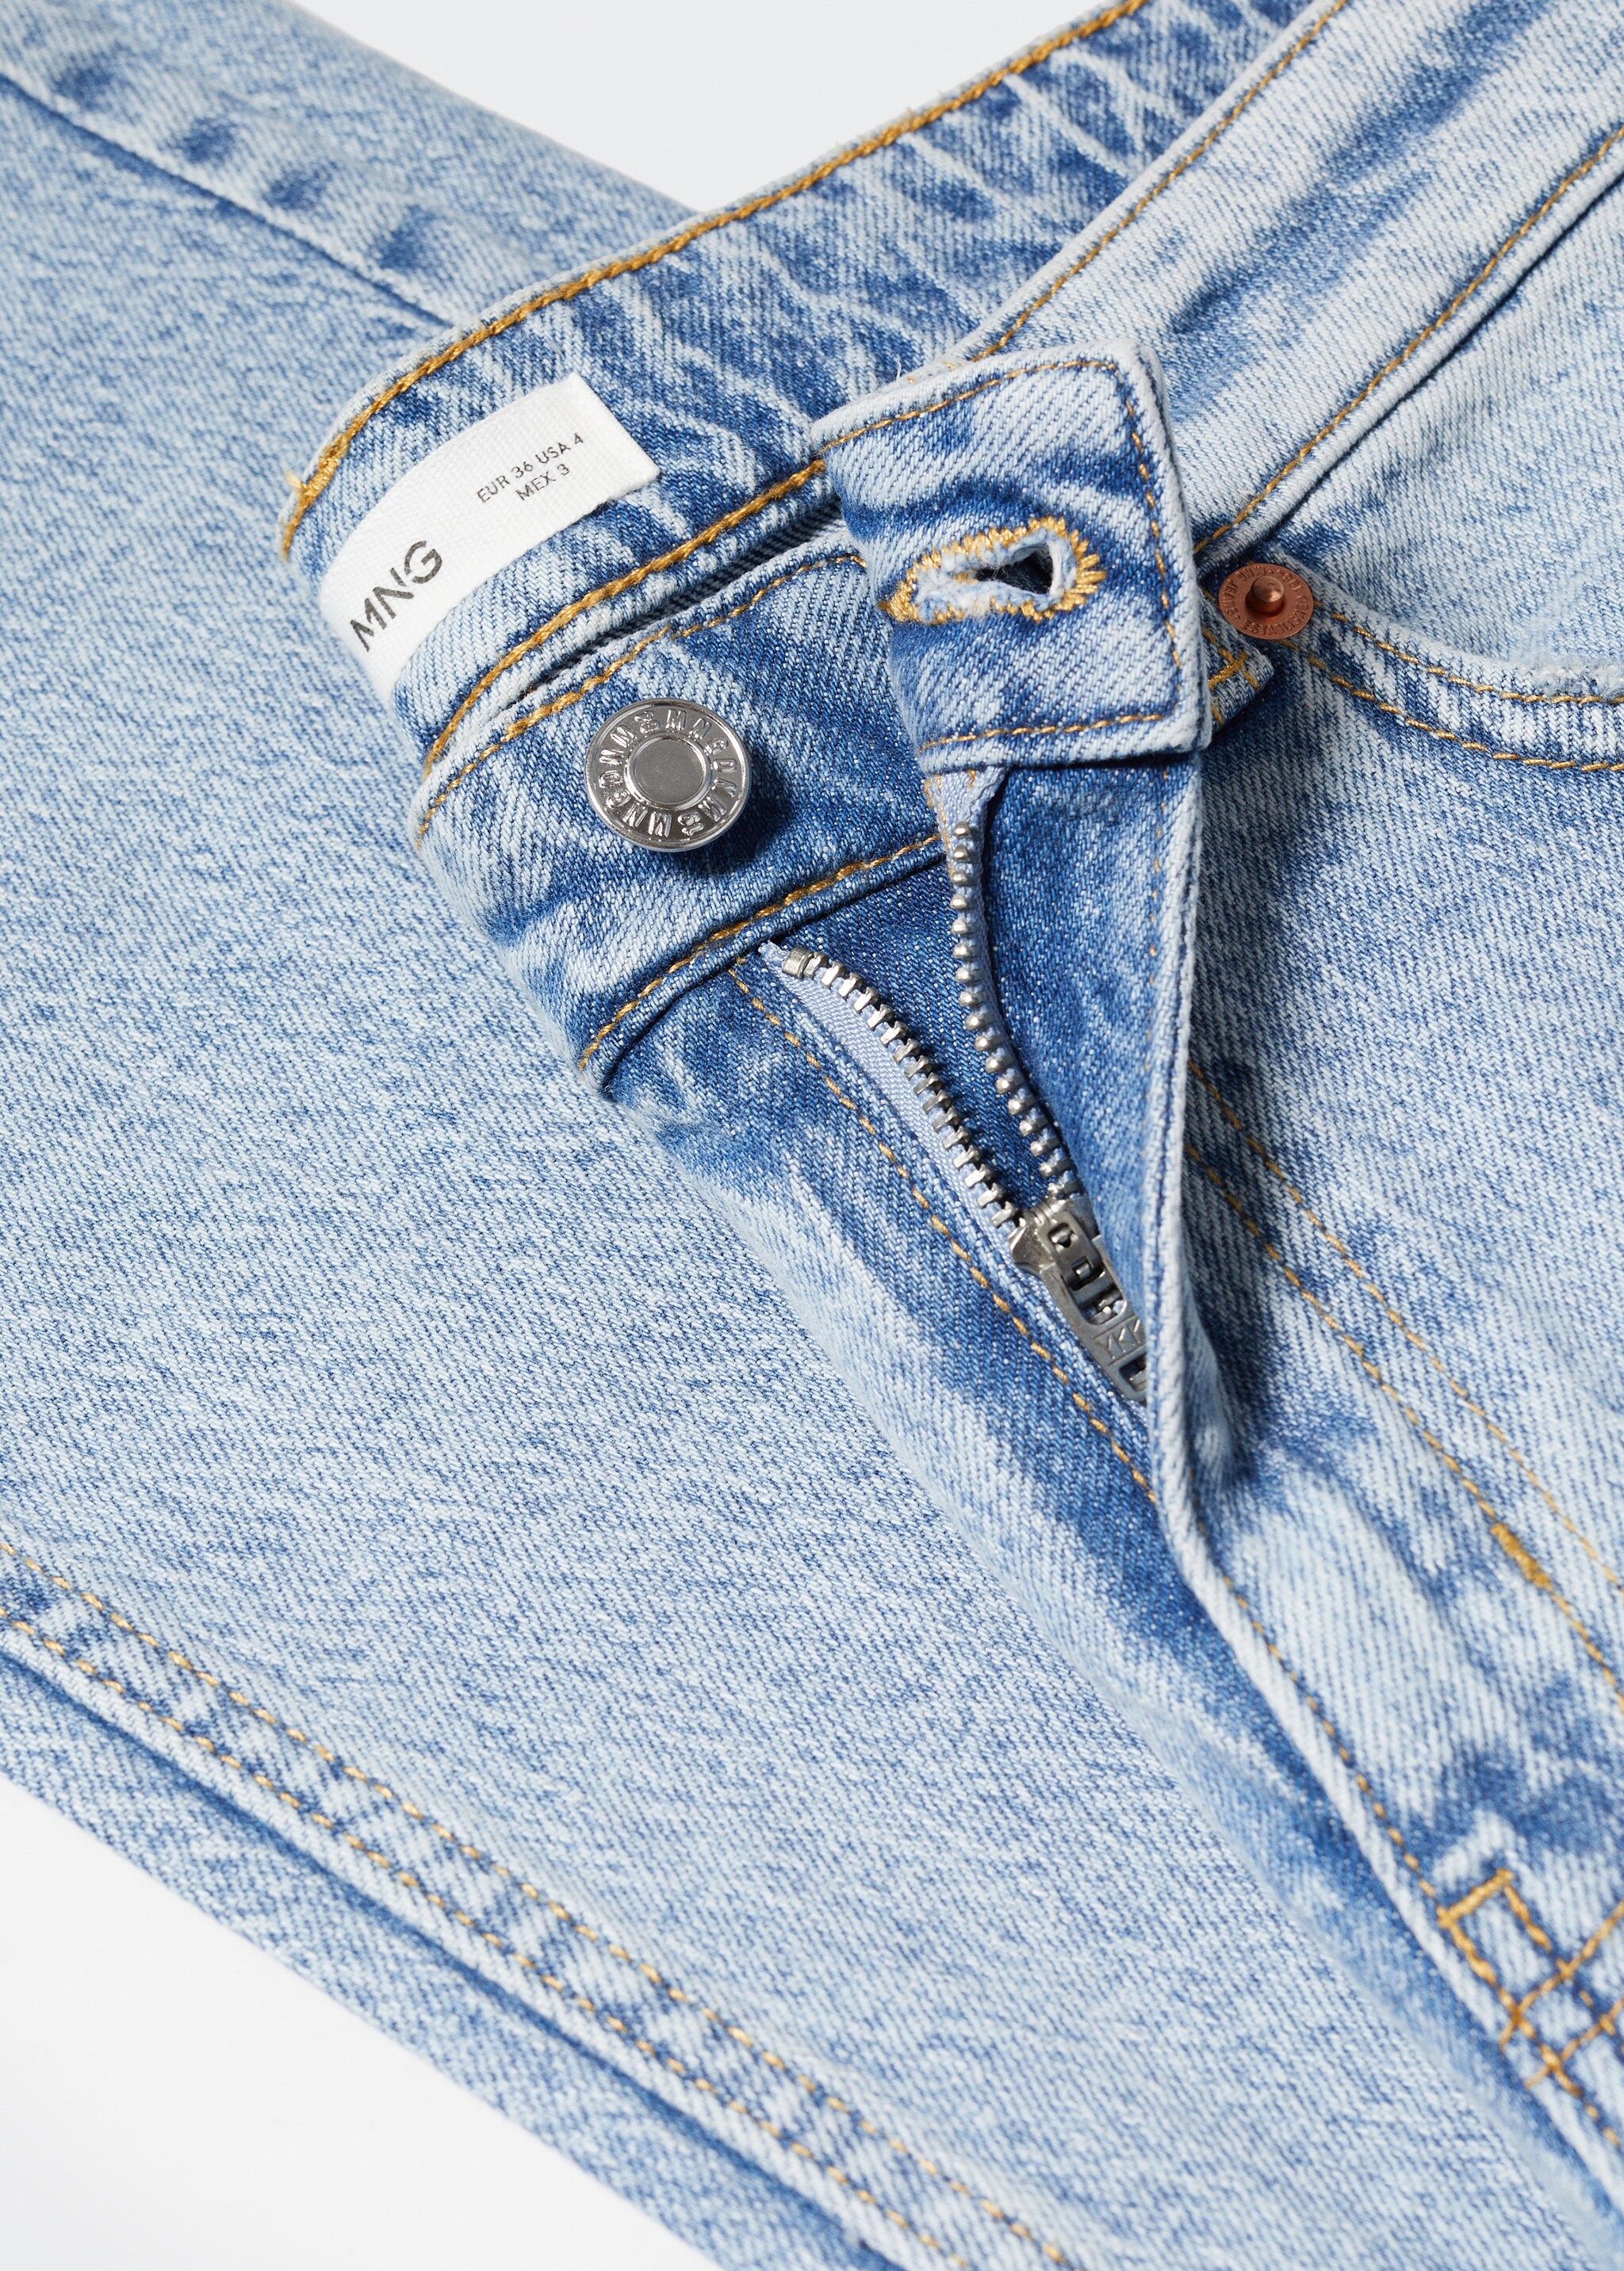 Medium-comfort straight jeans - Details of the article 8